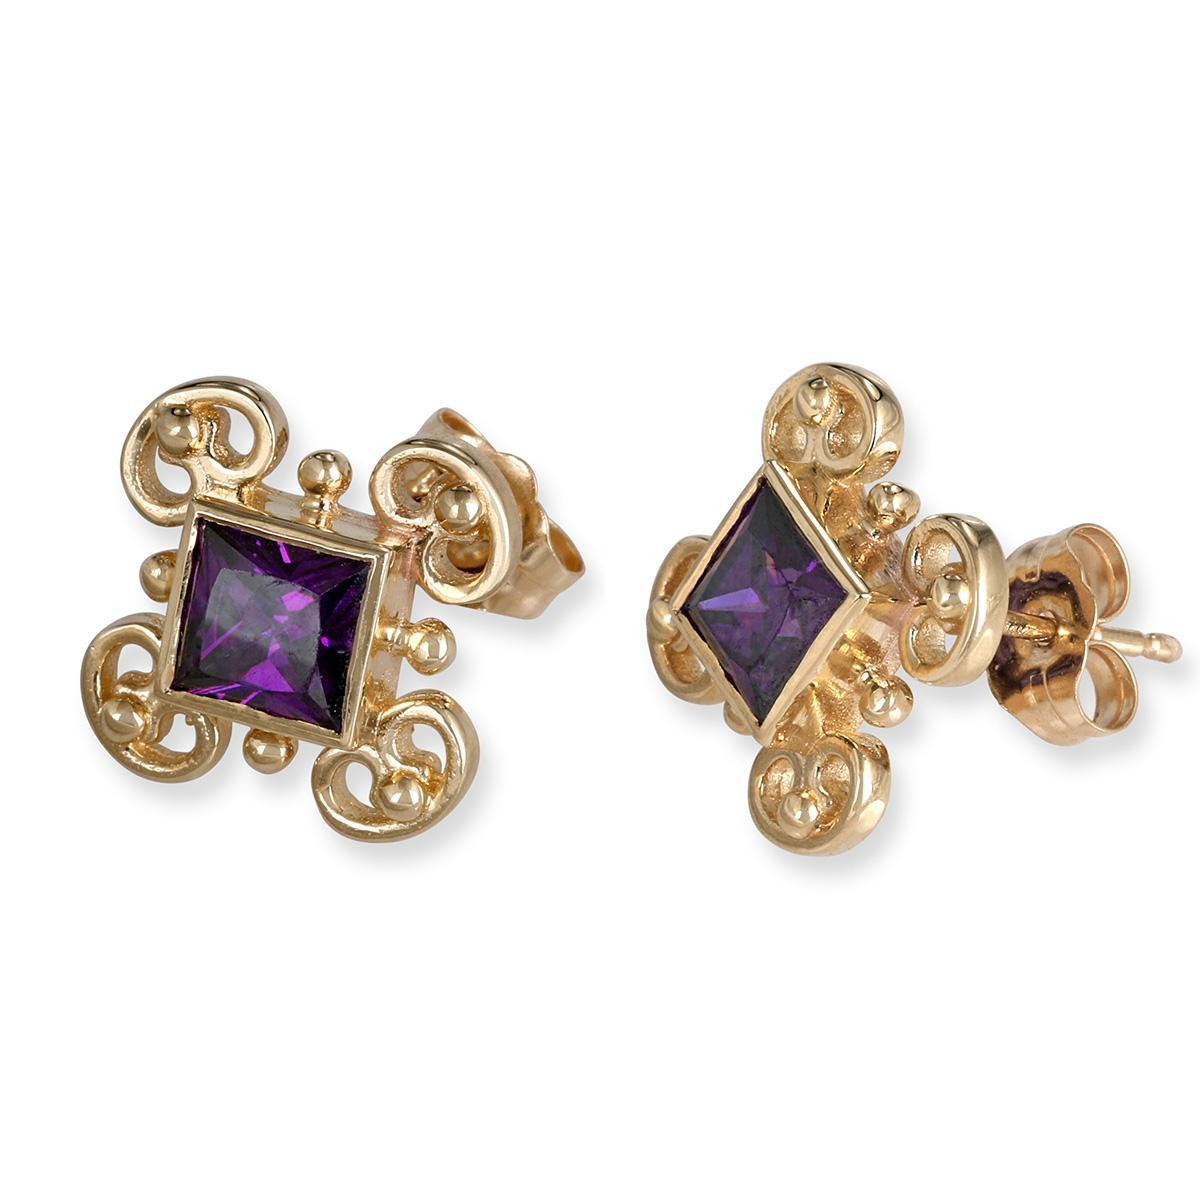 Rafael Jewelry Luxurious Handcrafted 14K Yellow Gold Earrings With Amethyst Stones - 1